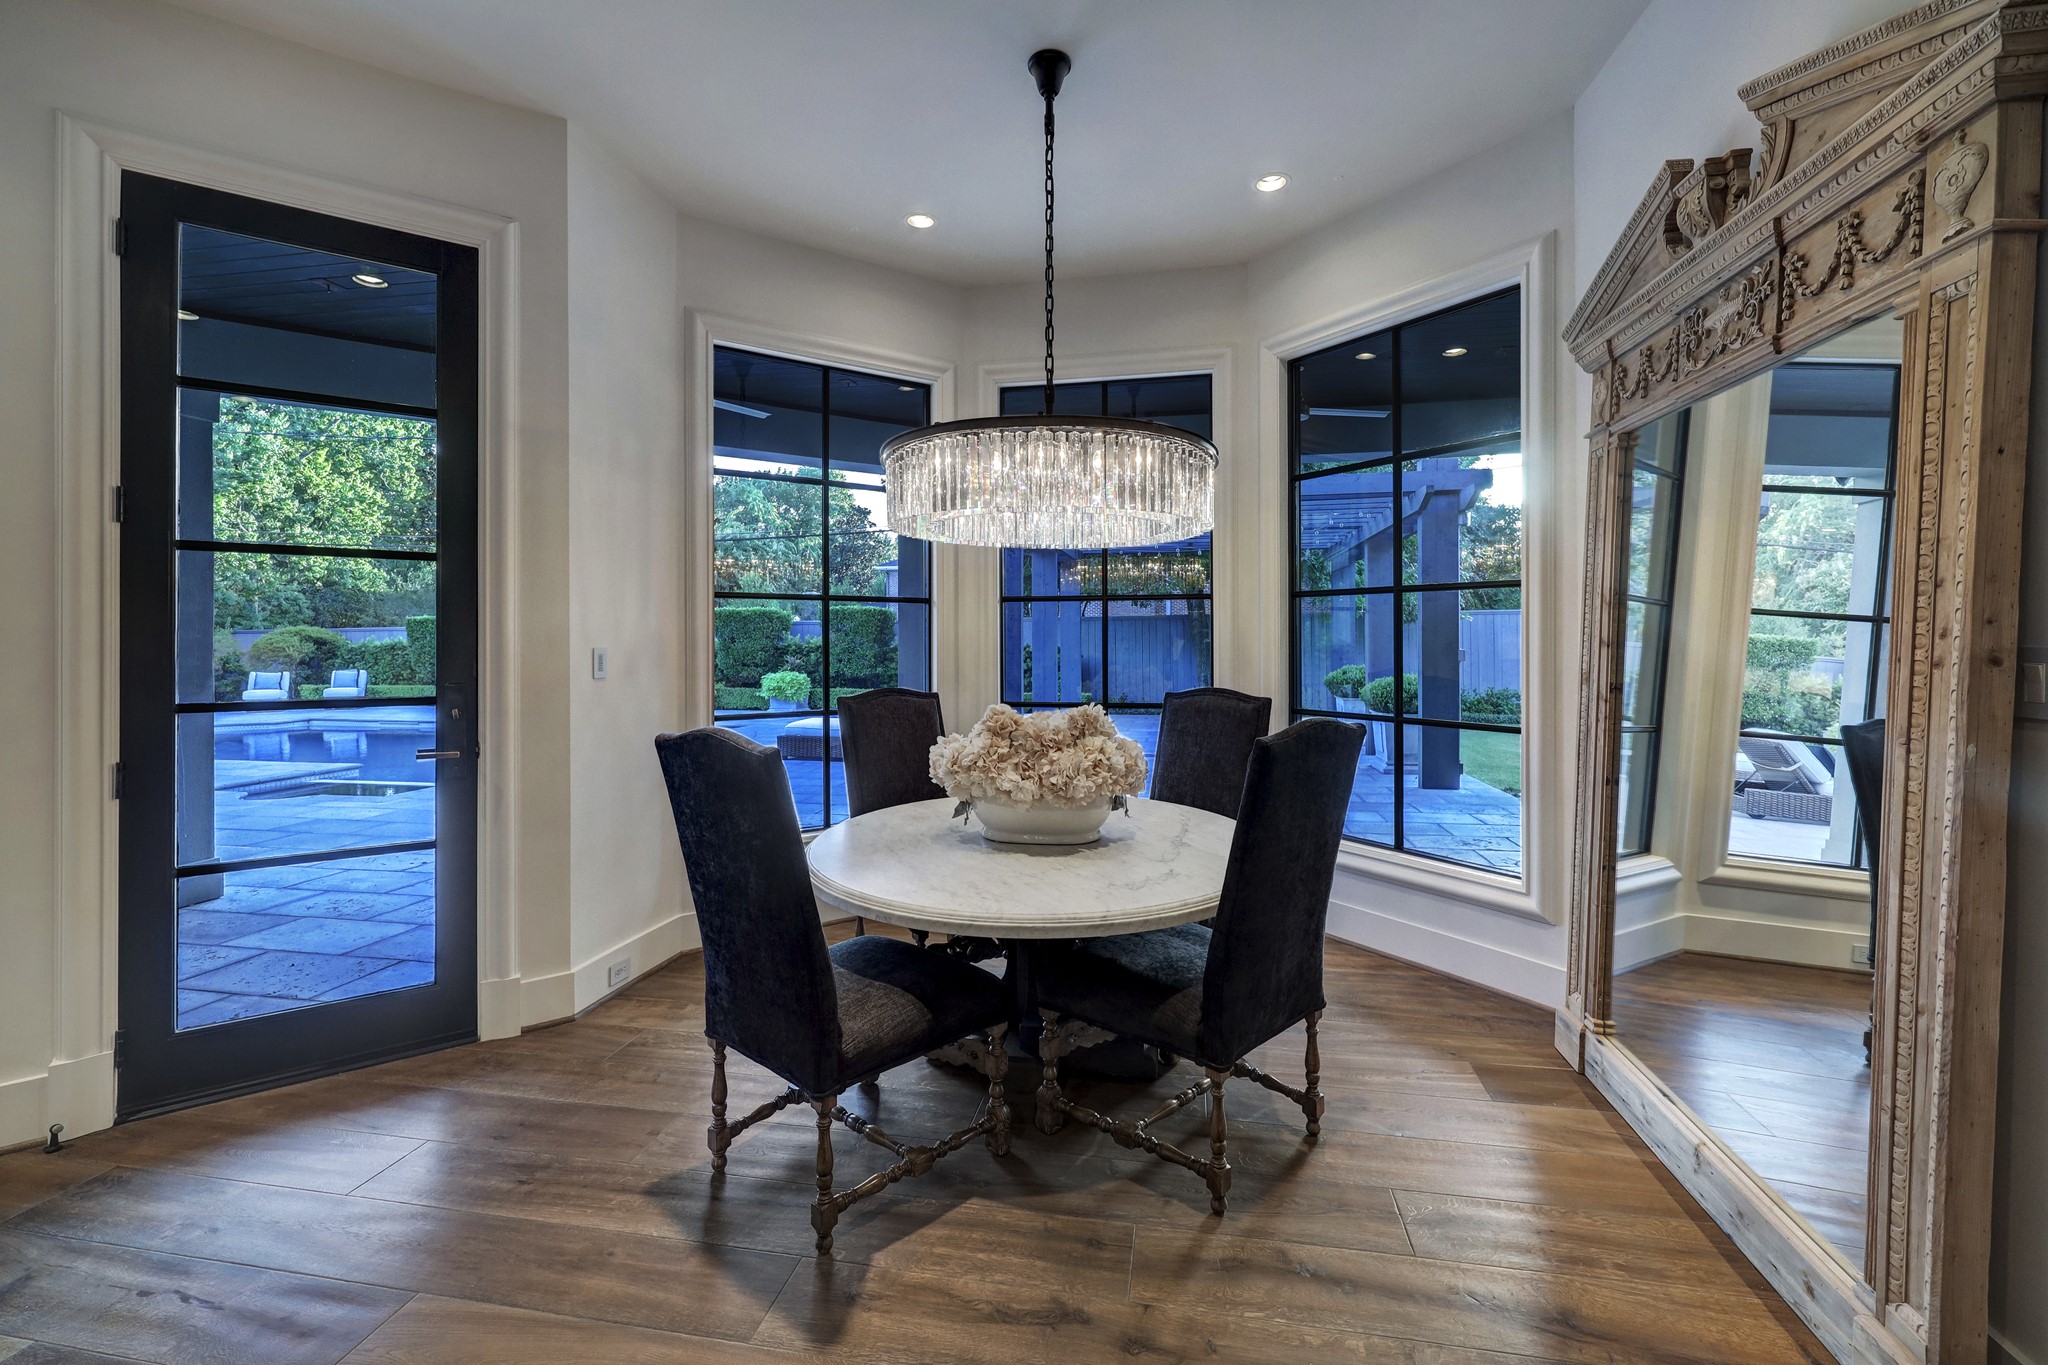 The sunny and bright breakfast room located off the kitchen features a striking glass chandelier, bay windows, and has a steel and glass door conveniently located to lead you outside.